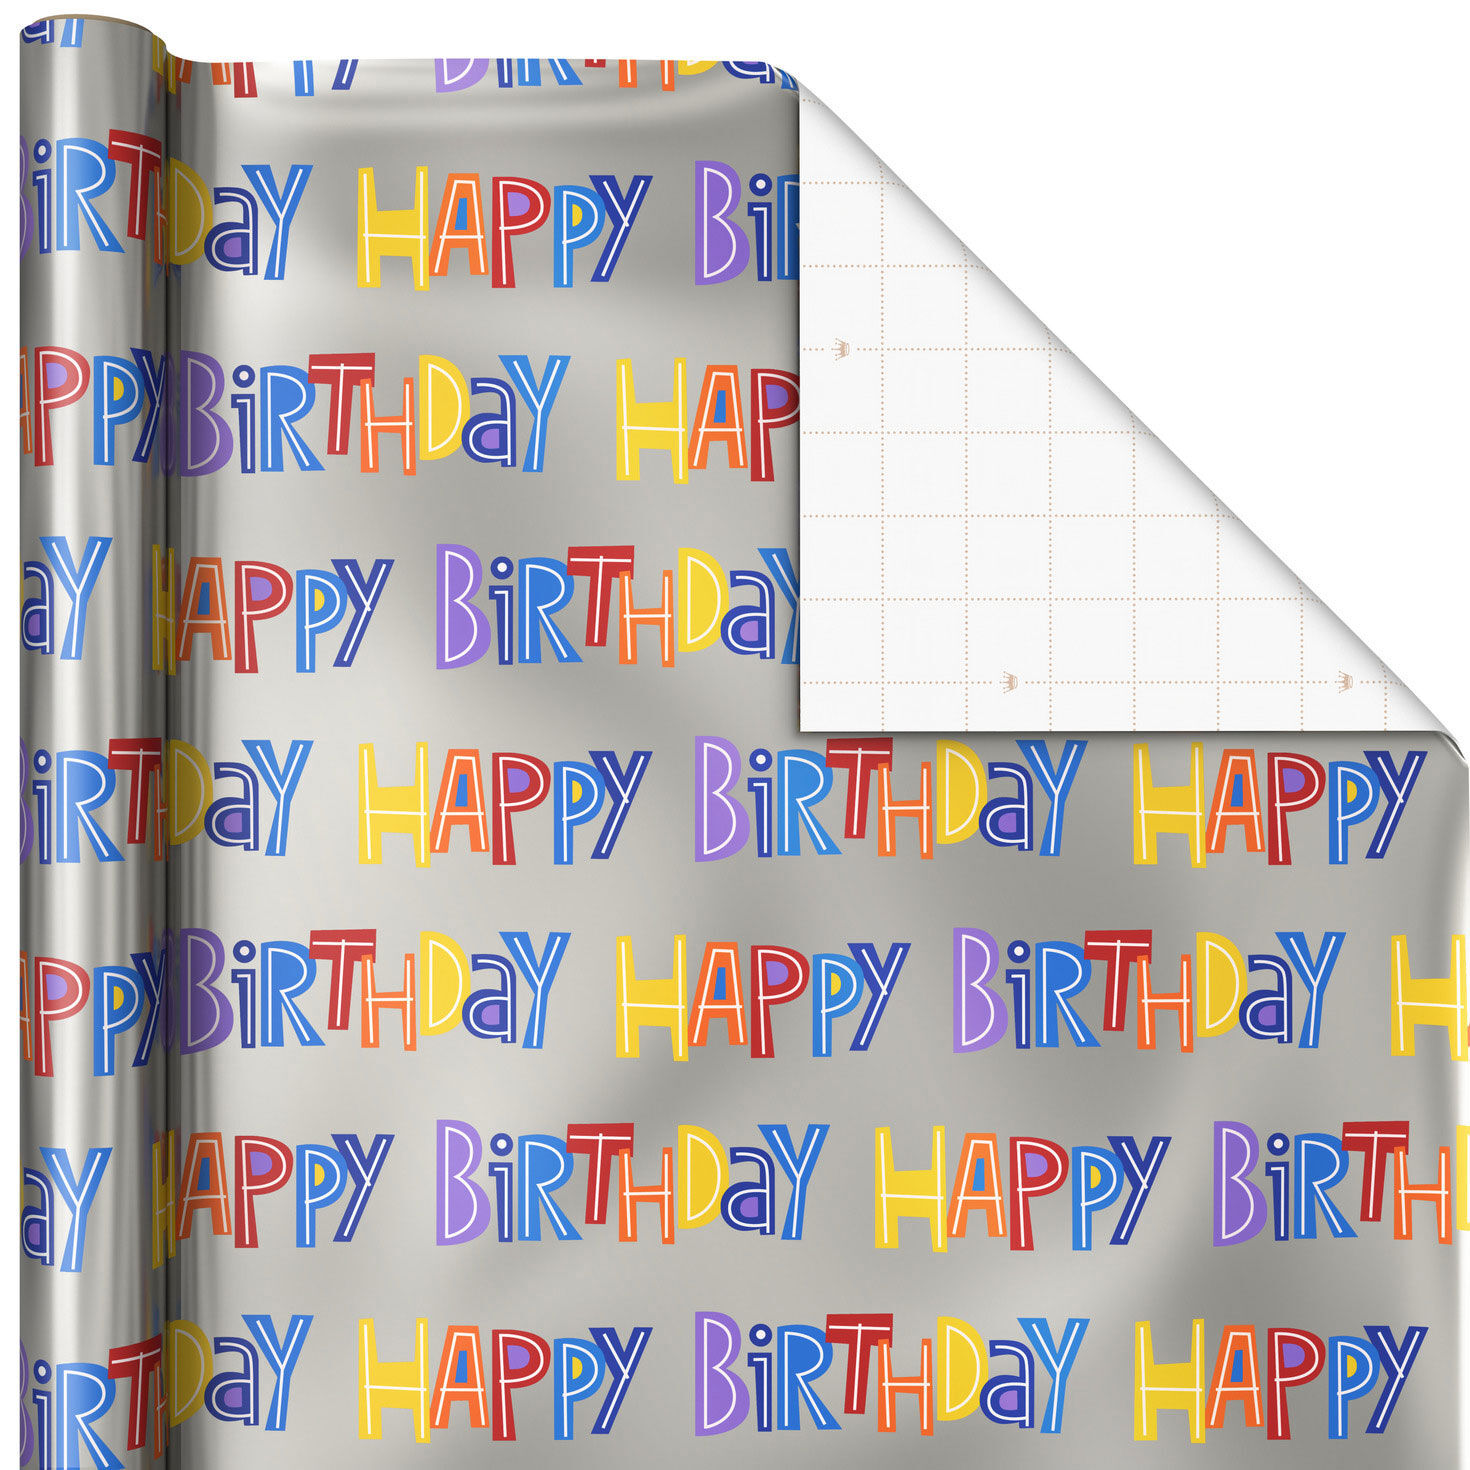 2 SHEETS OF THICK GLOSSY 70TH BIRTHDAY WRAPPING PAPER WITH MATCHING GIFT TAG 